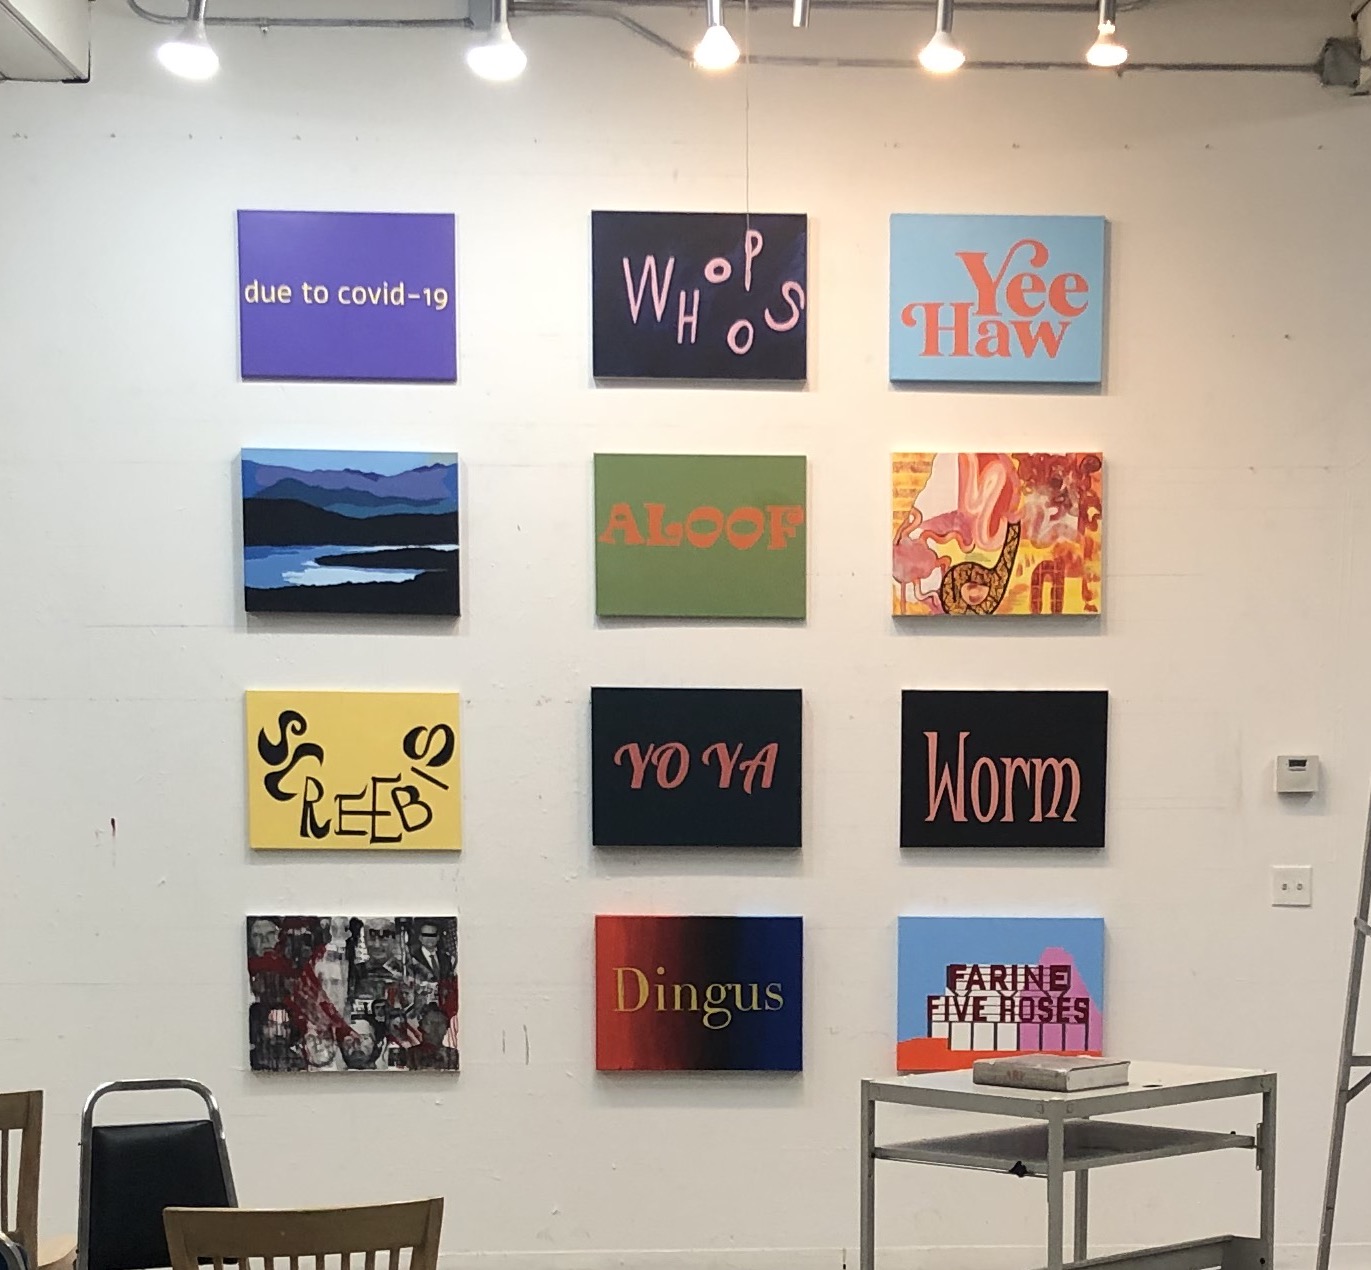 12 acrylic graphic paintings hang on the wall. They all say different words or phrases.